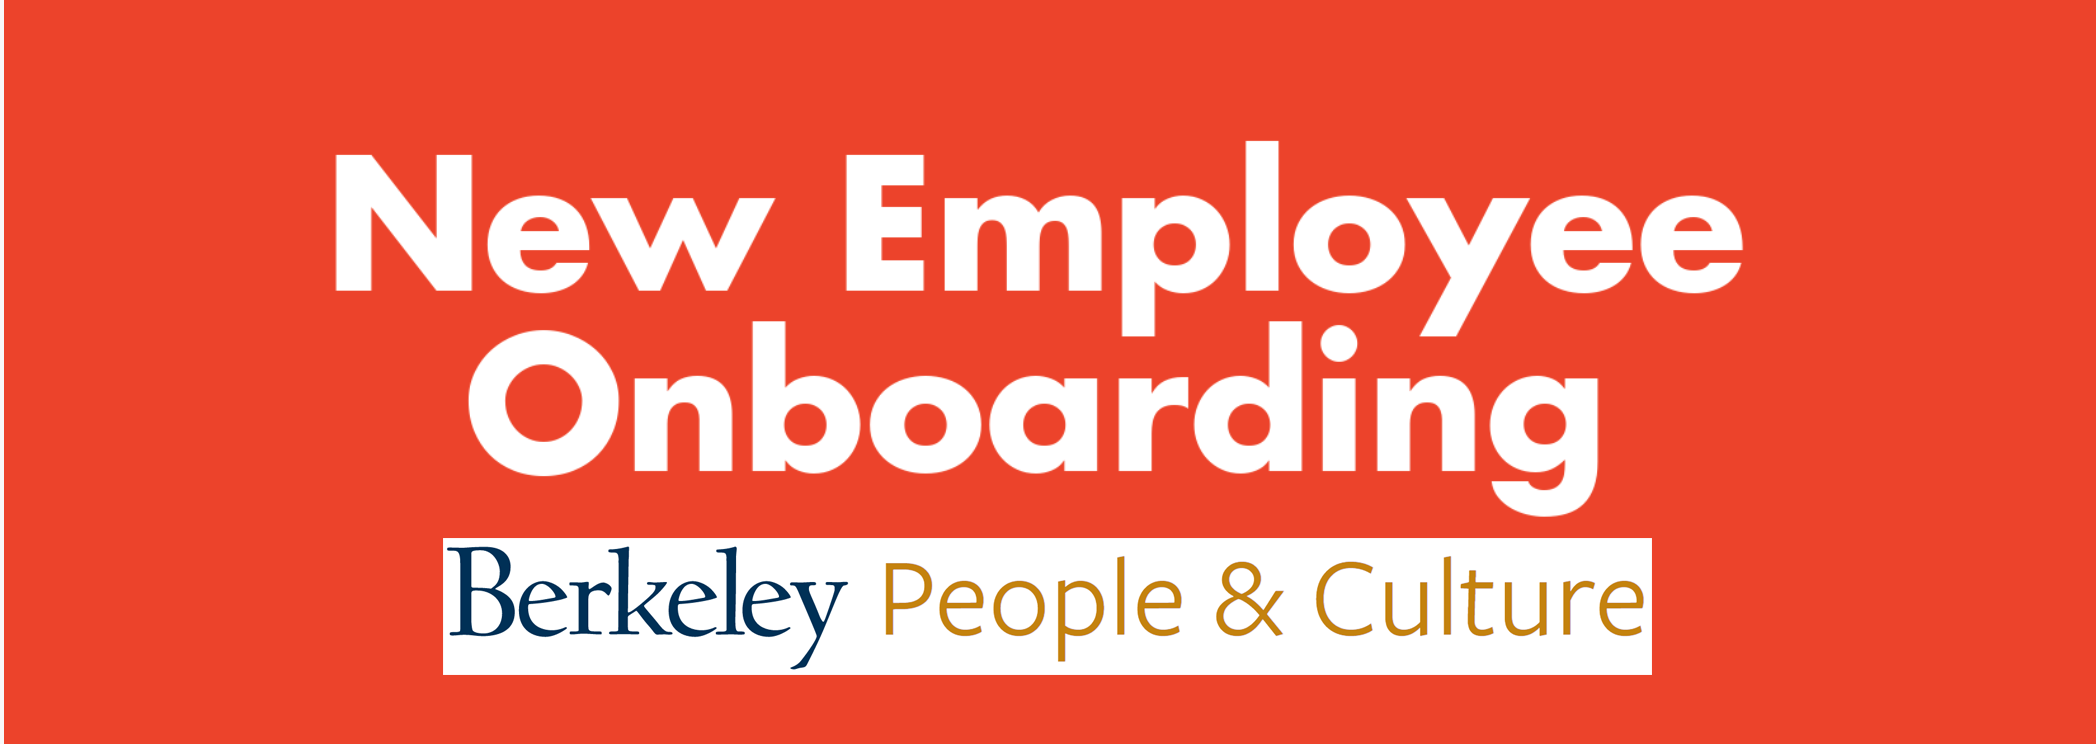 New Employee Onboarding Graphic Banner